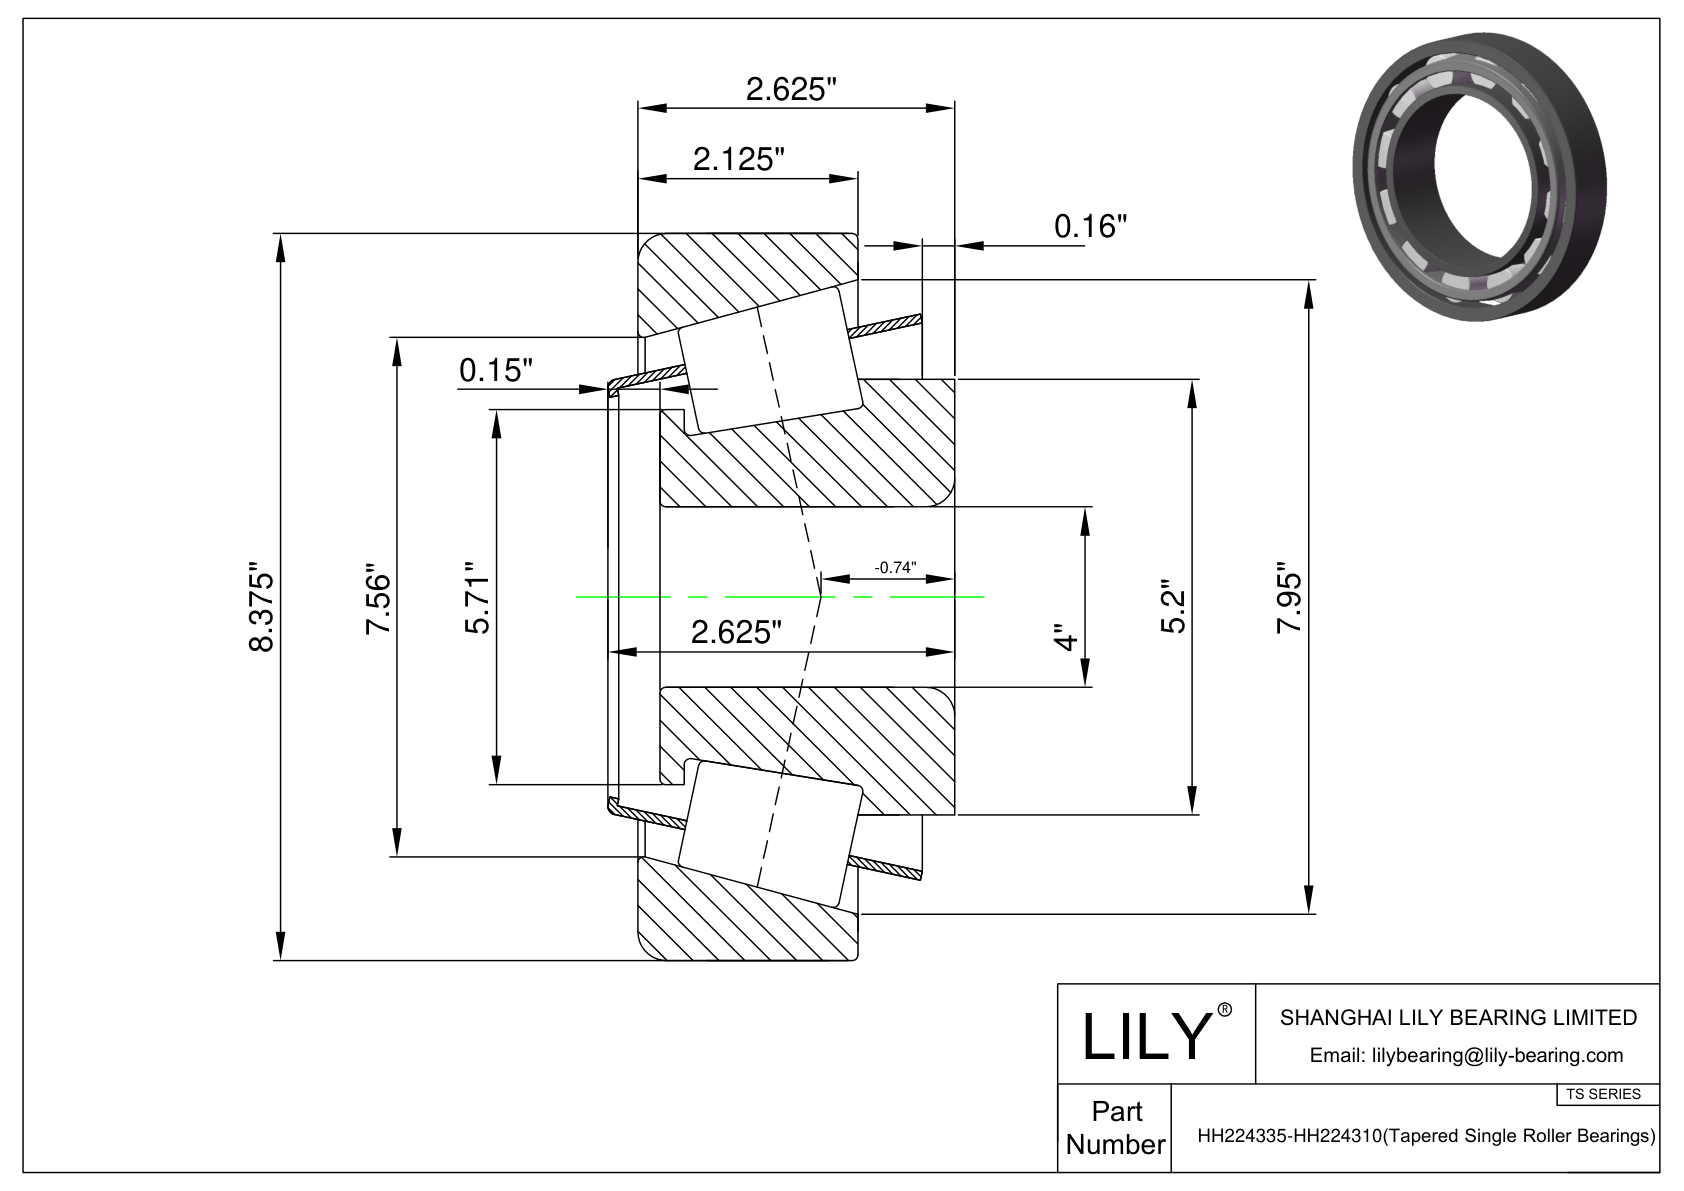 HH224335-HH224310 TS (Tapered Single Roller Bearings) (Imperial) cad drawing